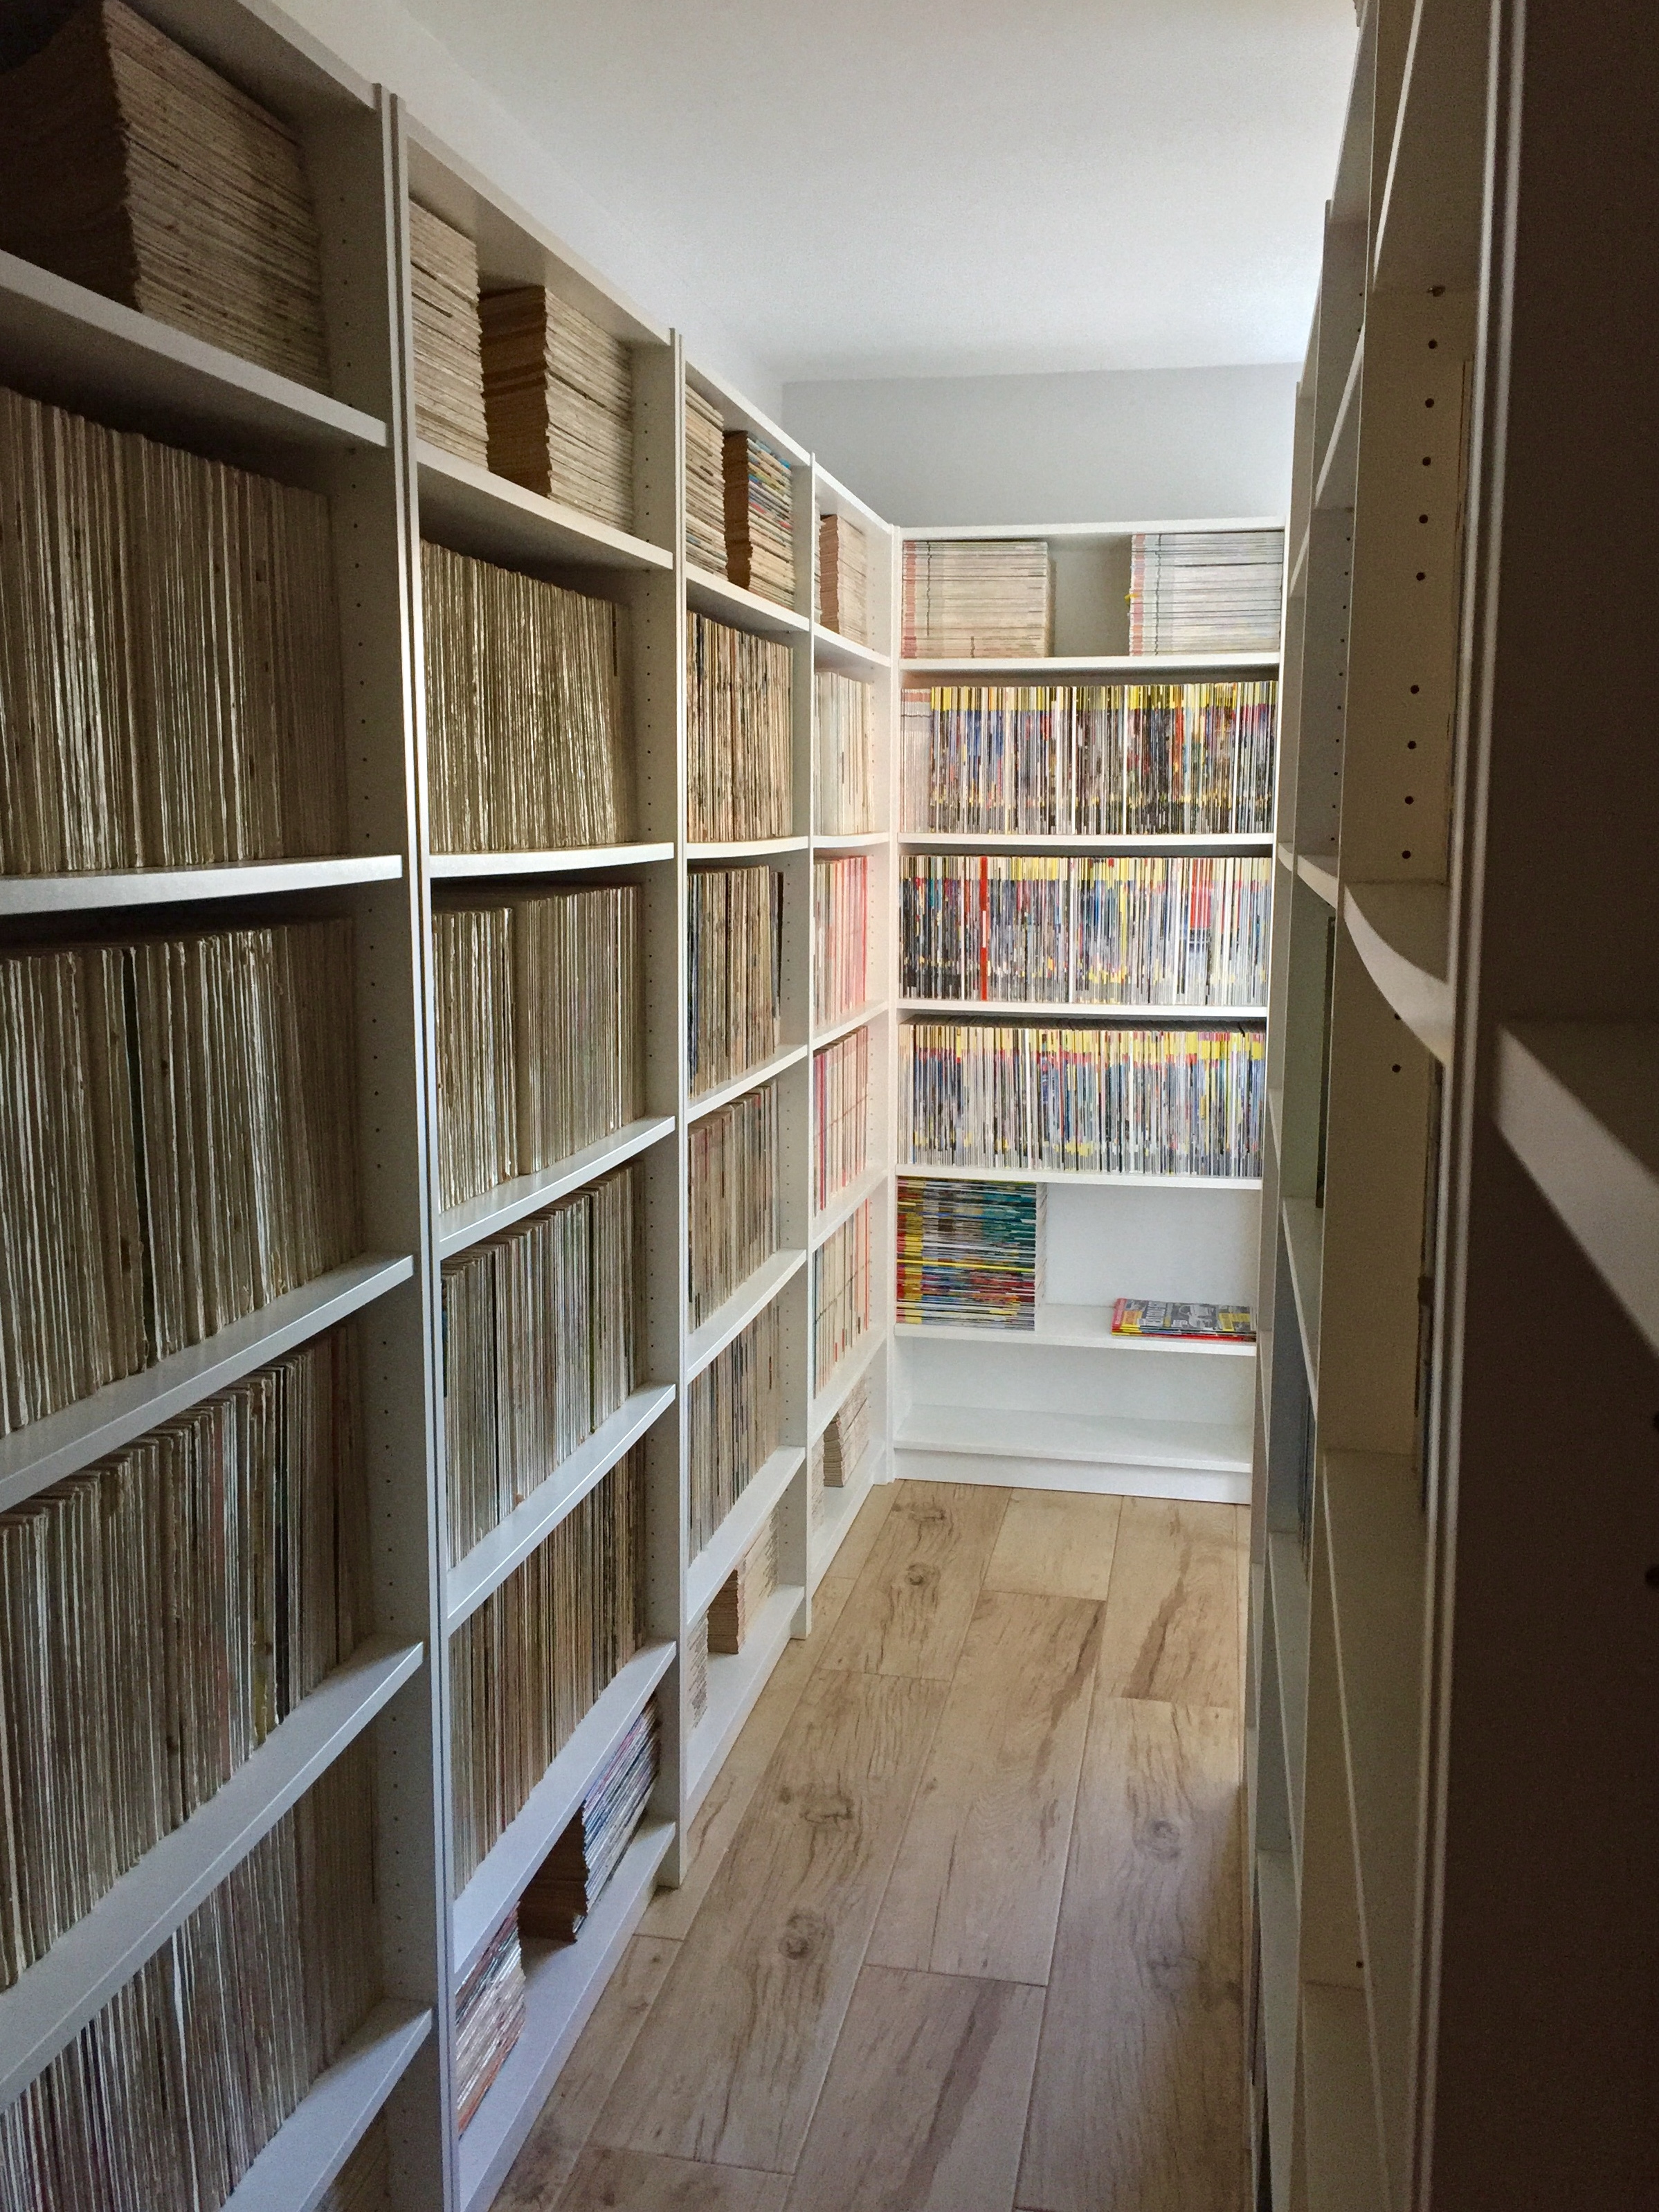 Archive shelving at the The Joy Of Specs